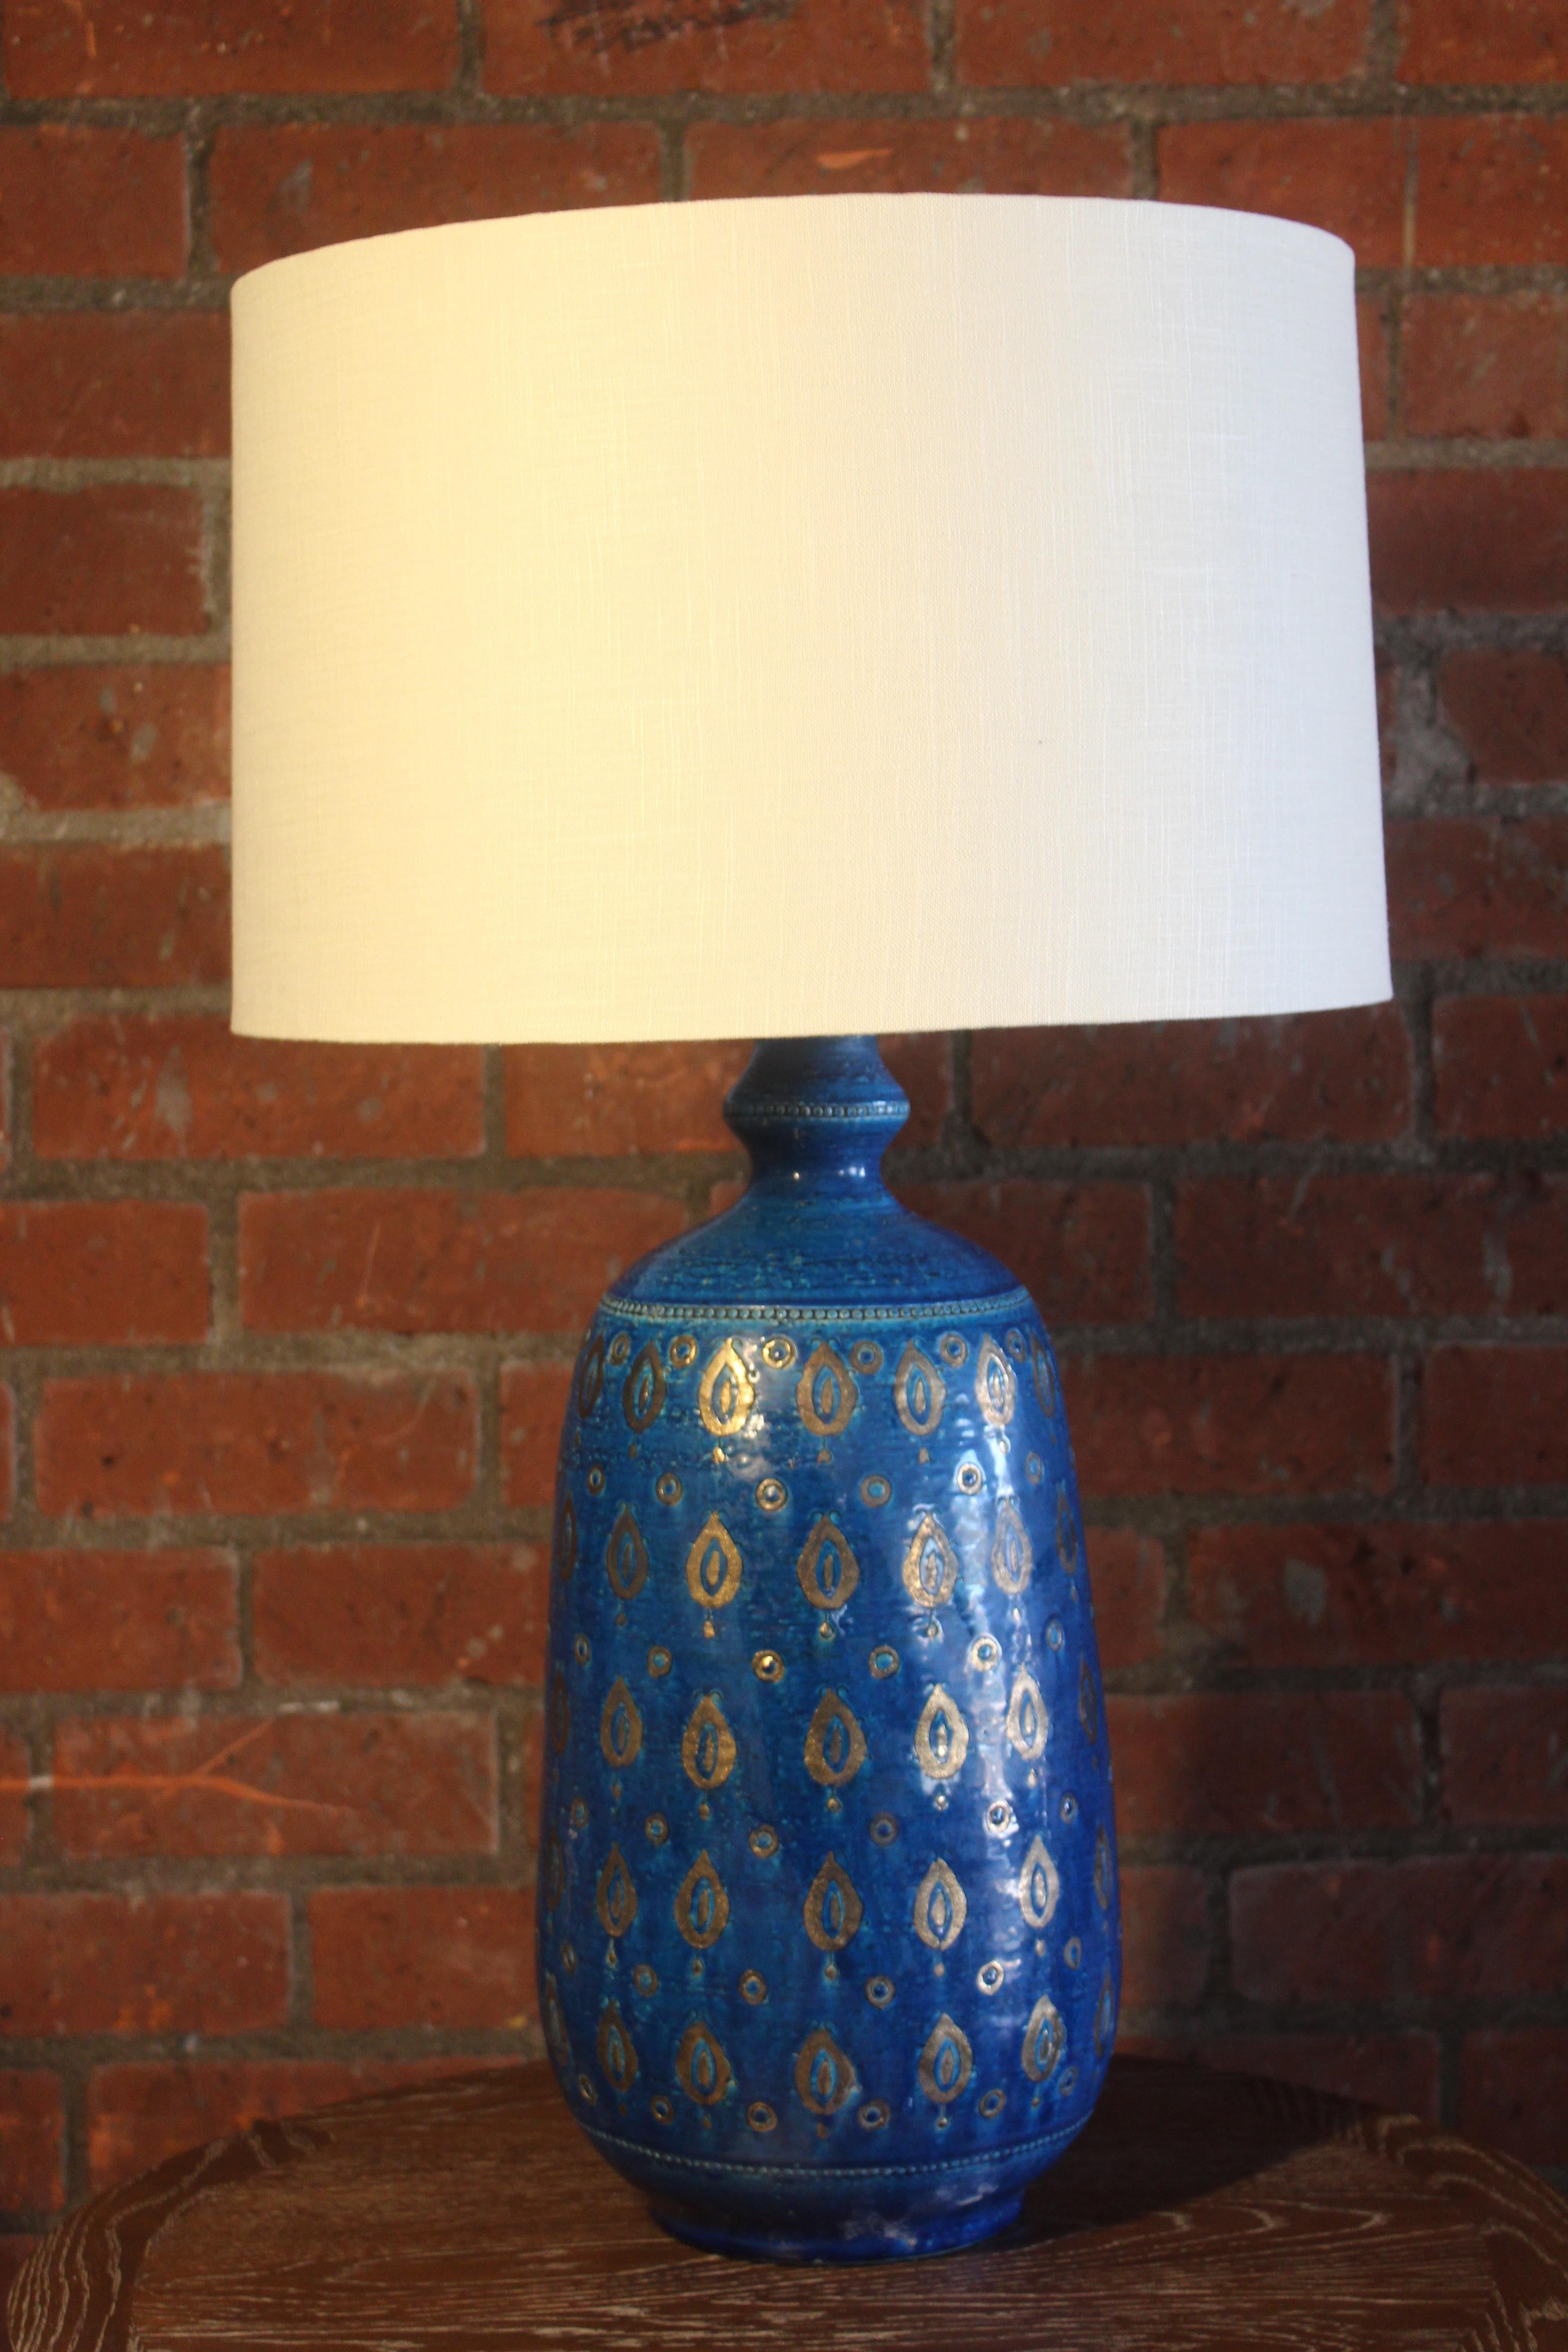 A beautiful ceramic lamp in rimini blue by Aldo Londi for Bitossi, Italy, 1960s. Newly rewired and fitted with a custom made shade in linen.